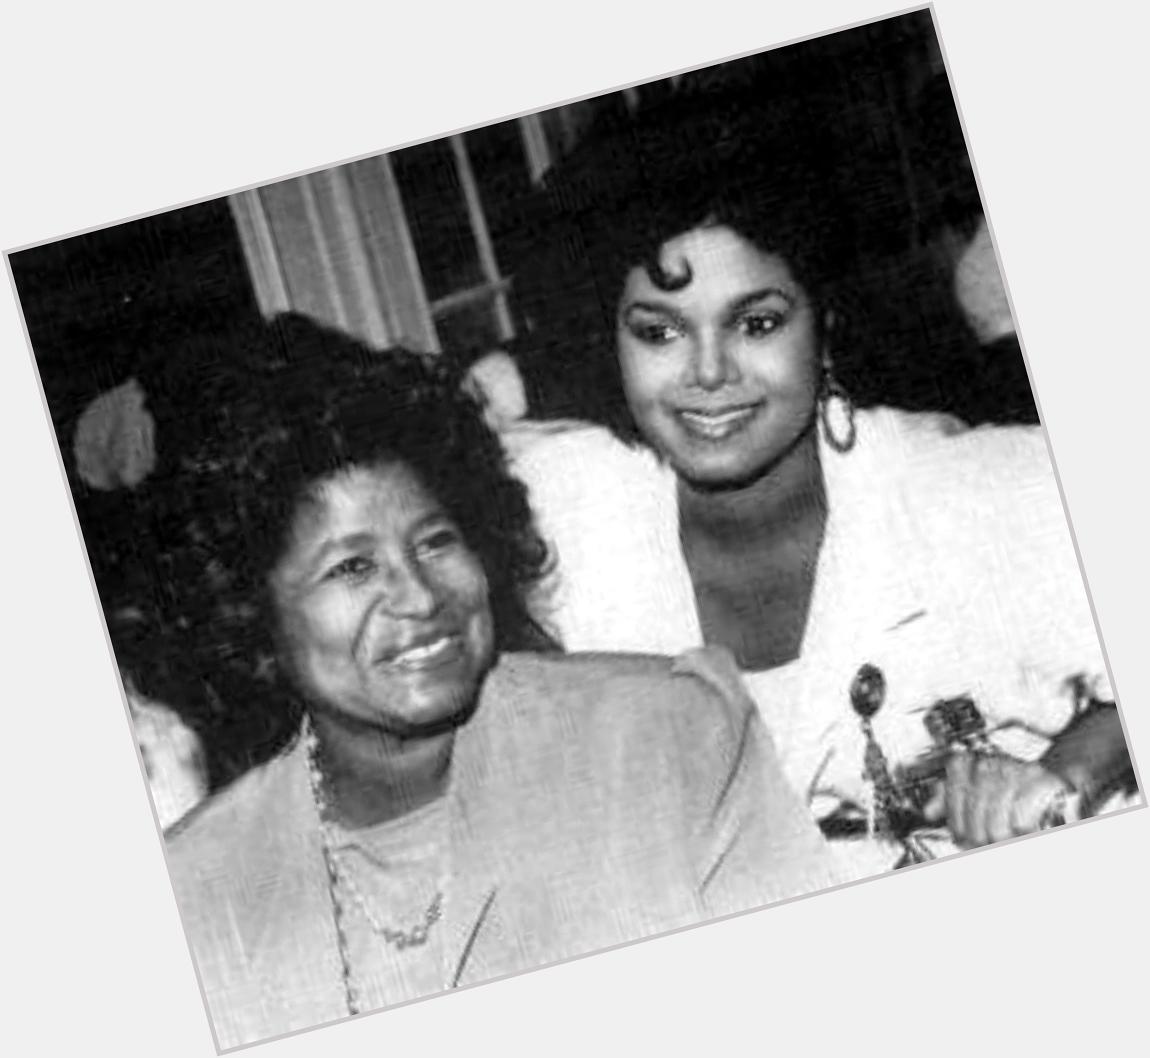 Happy birthday to the matriarch of the jackson clan, the real queen and hbic mrs. katherine jackson 